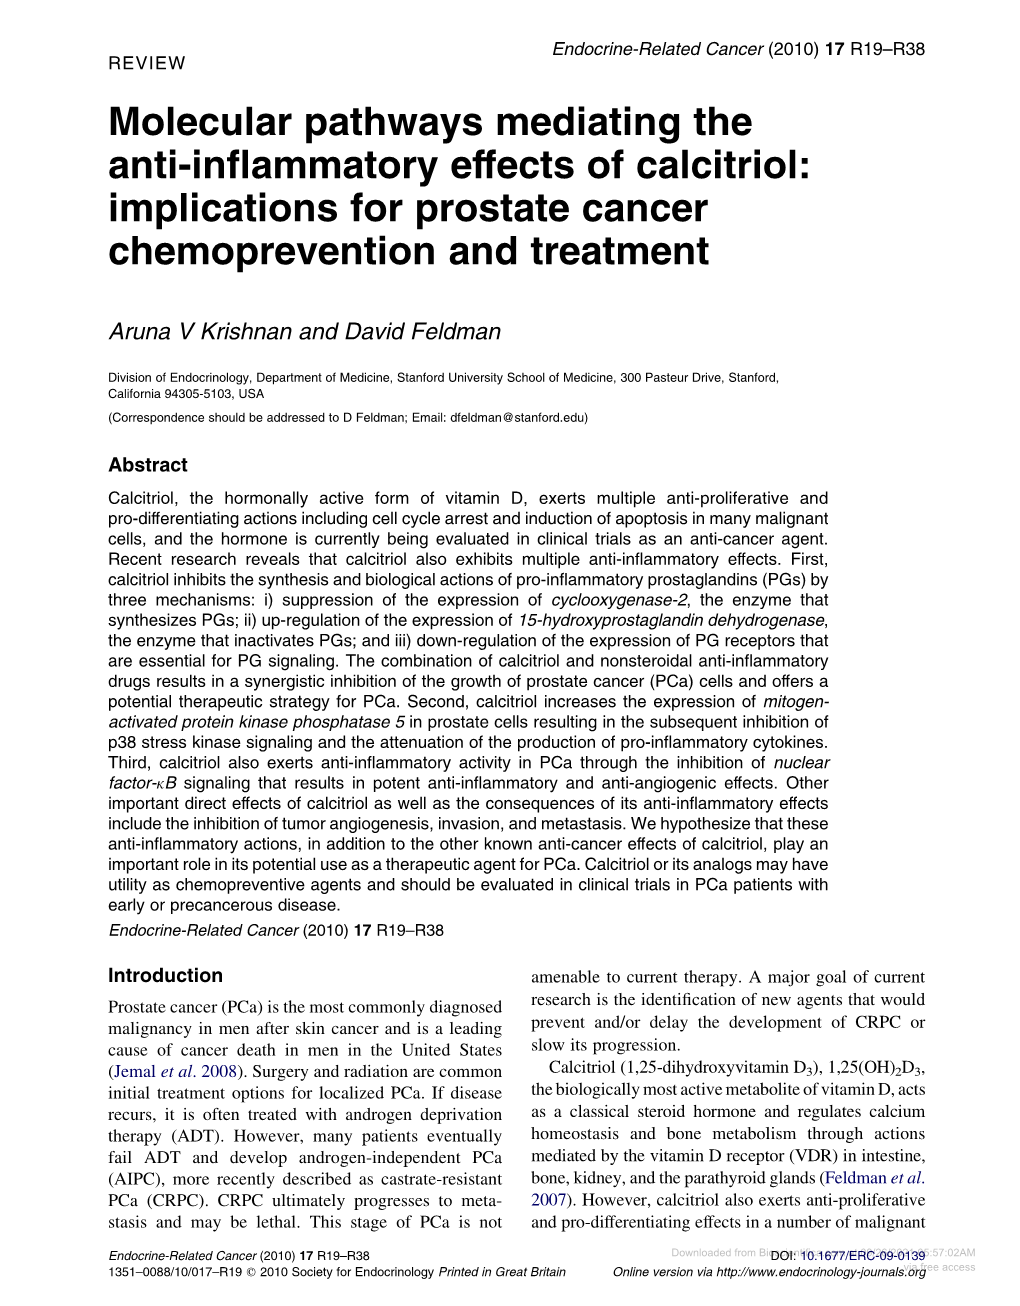 Molecular Pathways Mediating the Anti-Inflammatory Effects of Calcitriol